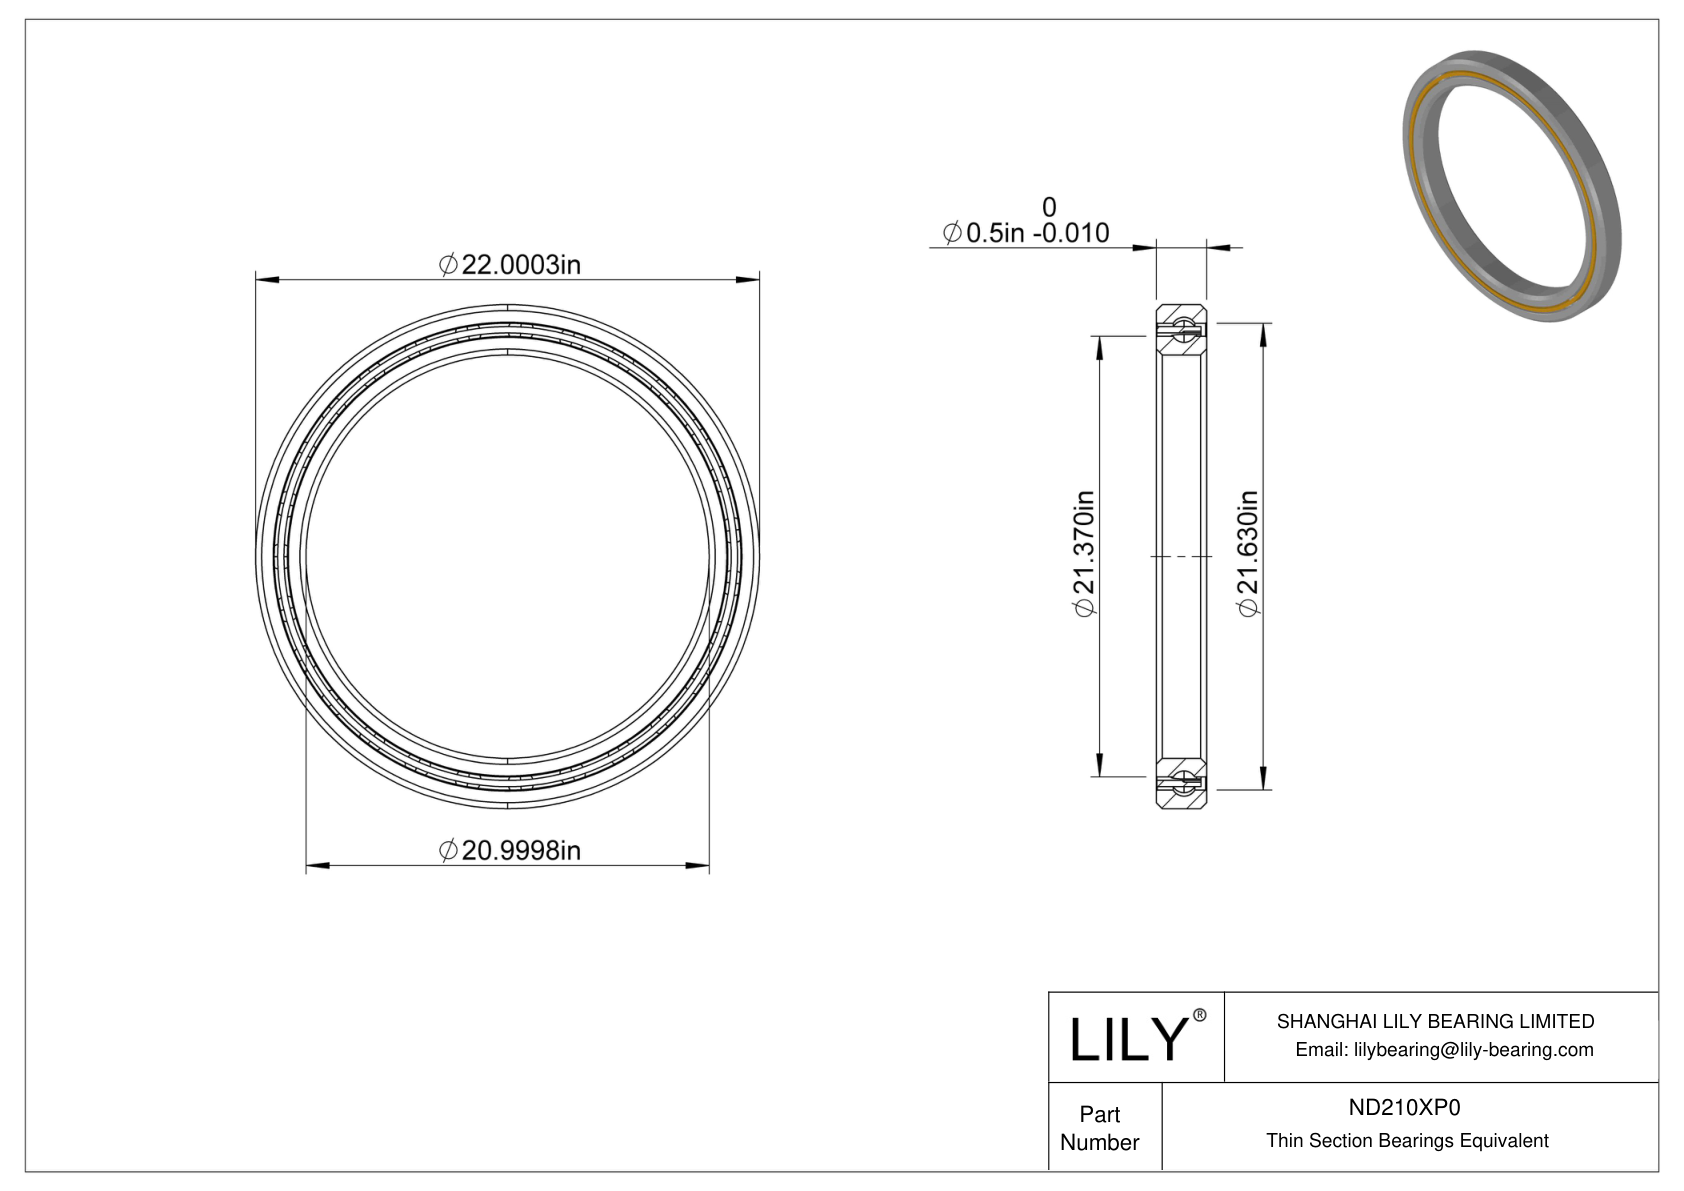 ND210XP0 Constant Section (CS) Bearings cad drawing